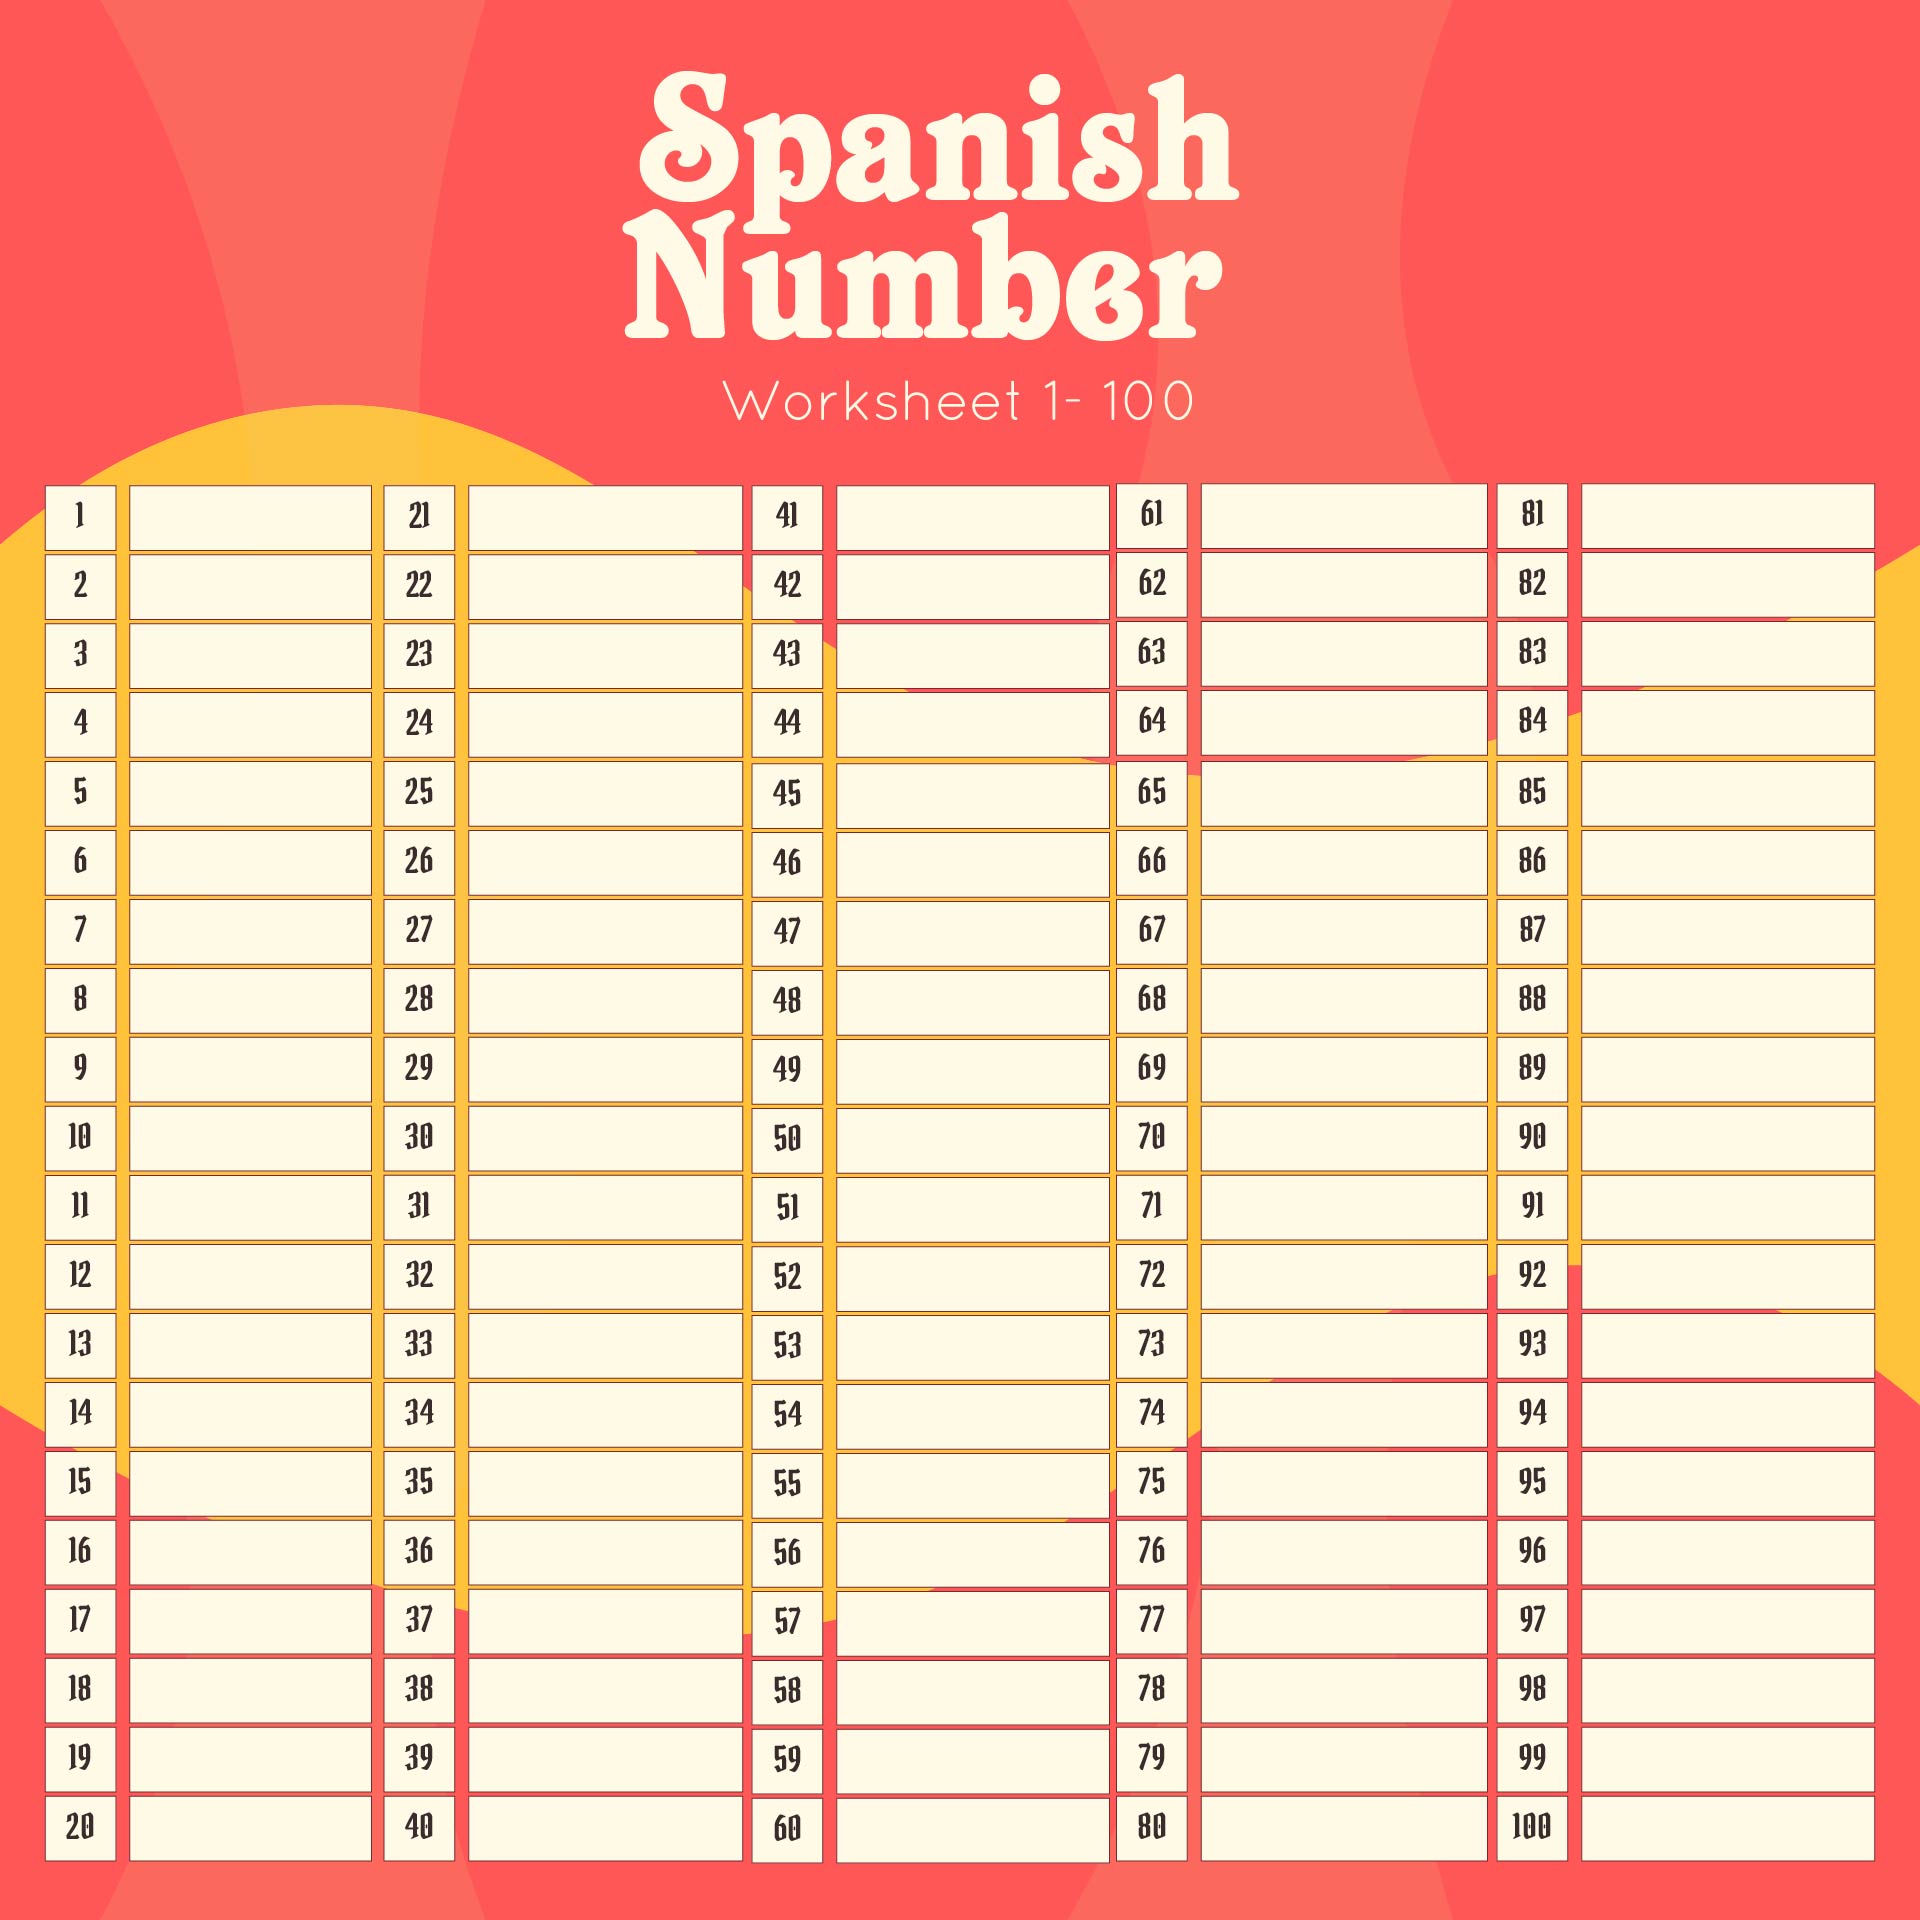 free-spanish-numbers-practice-worksheets-number-formation-and-more-spanish-numbers